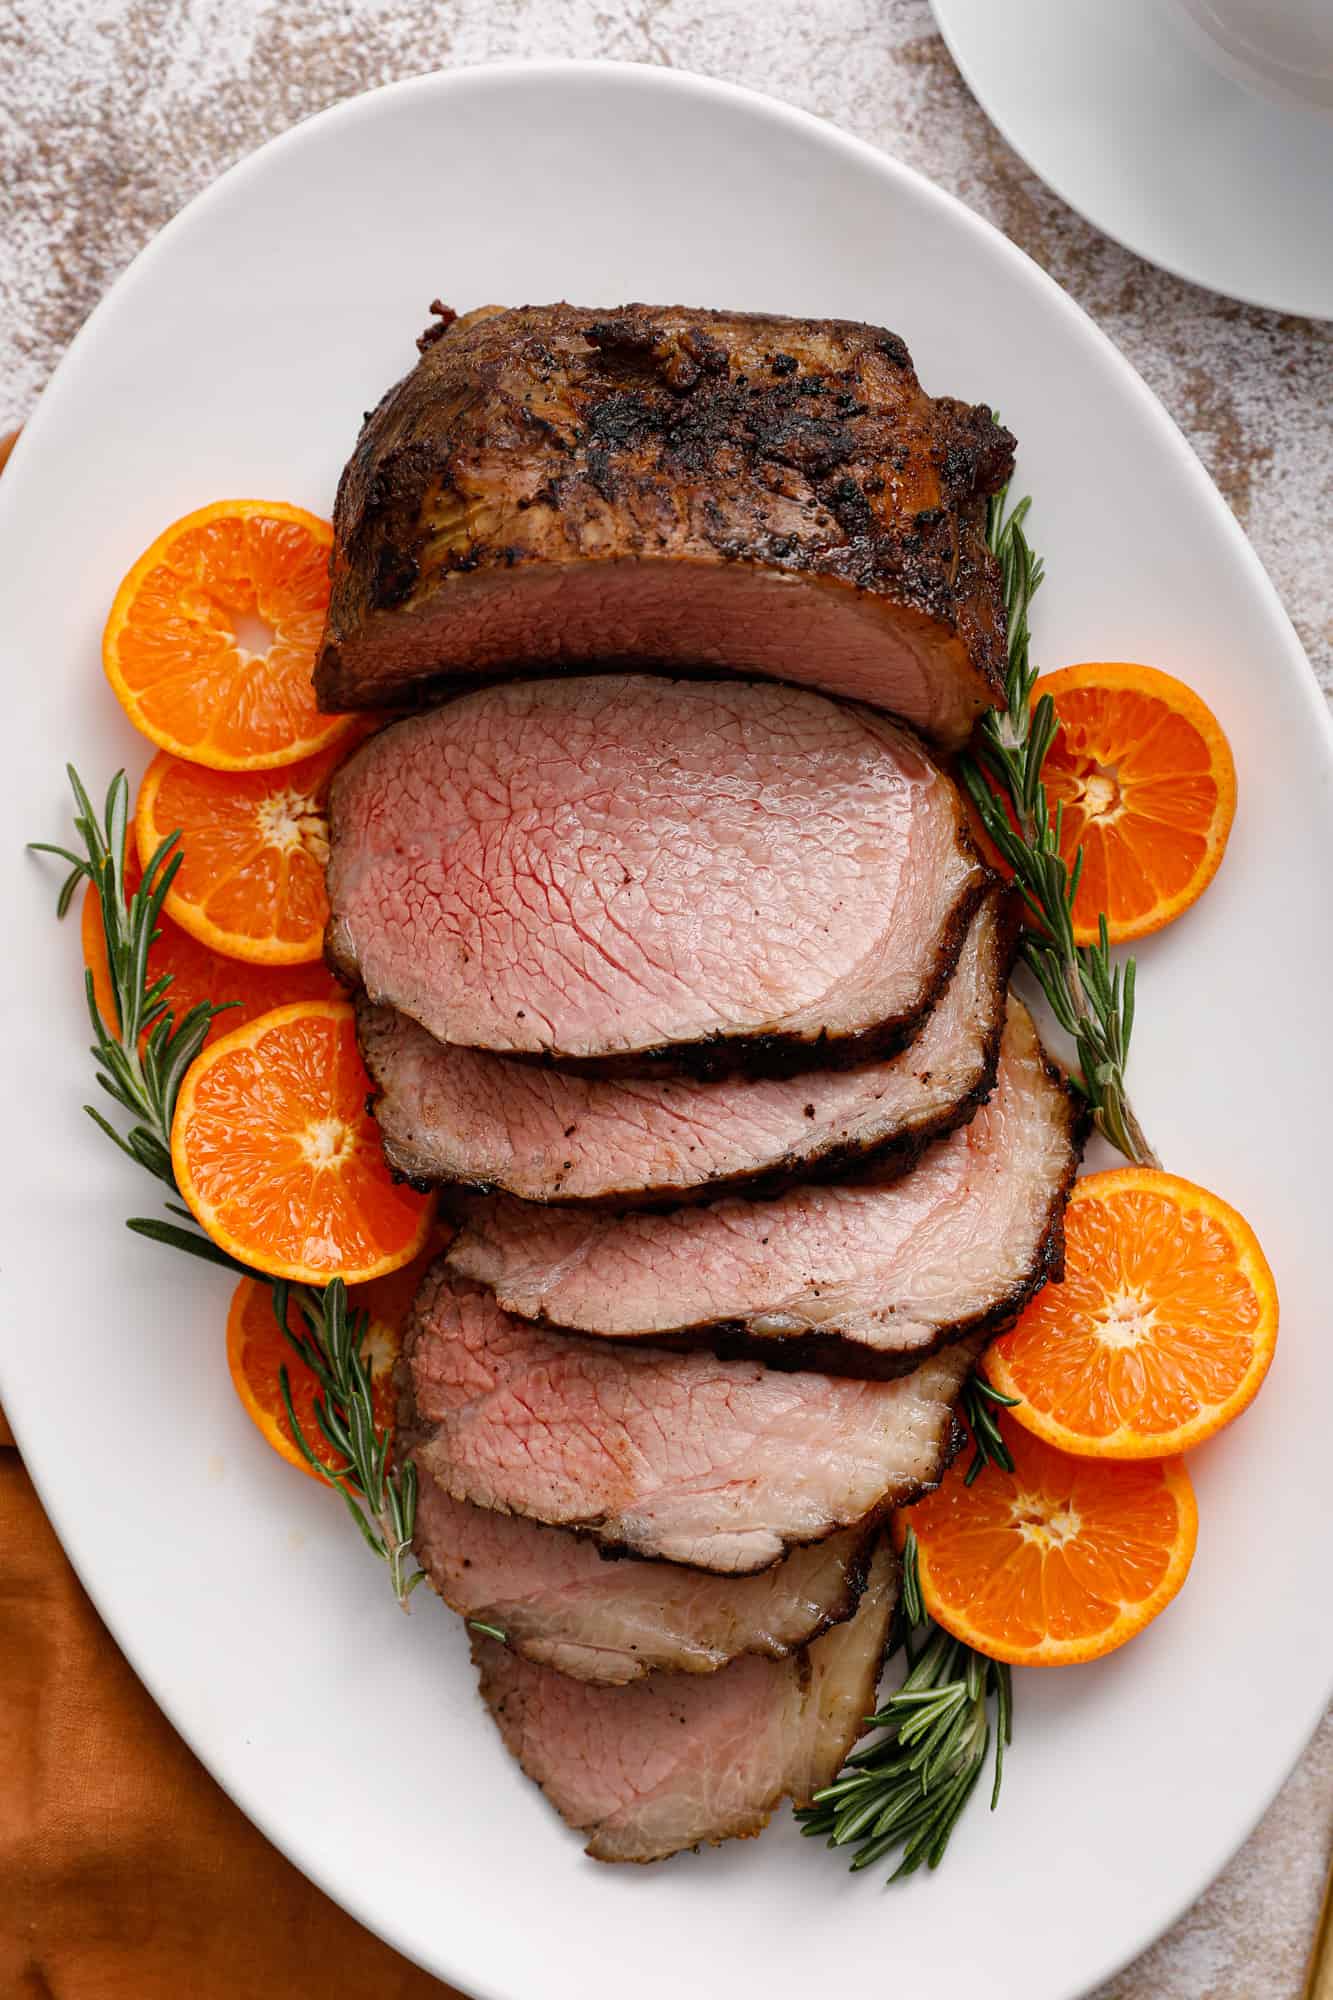 70 Delicious Beef Recipes for Christmas Dinner - Six Sisters&amp;#39; Stuff